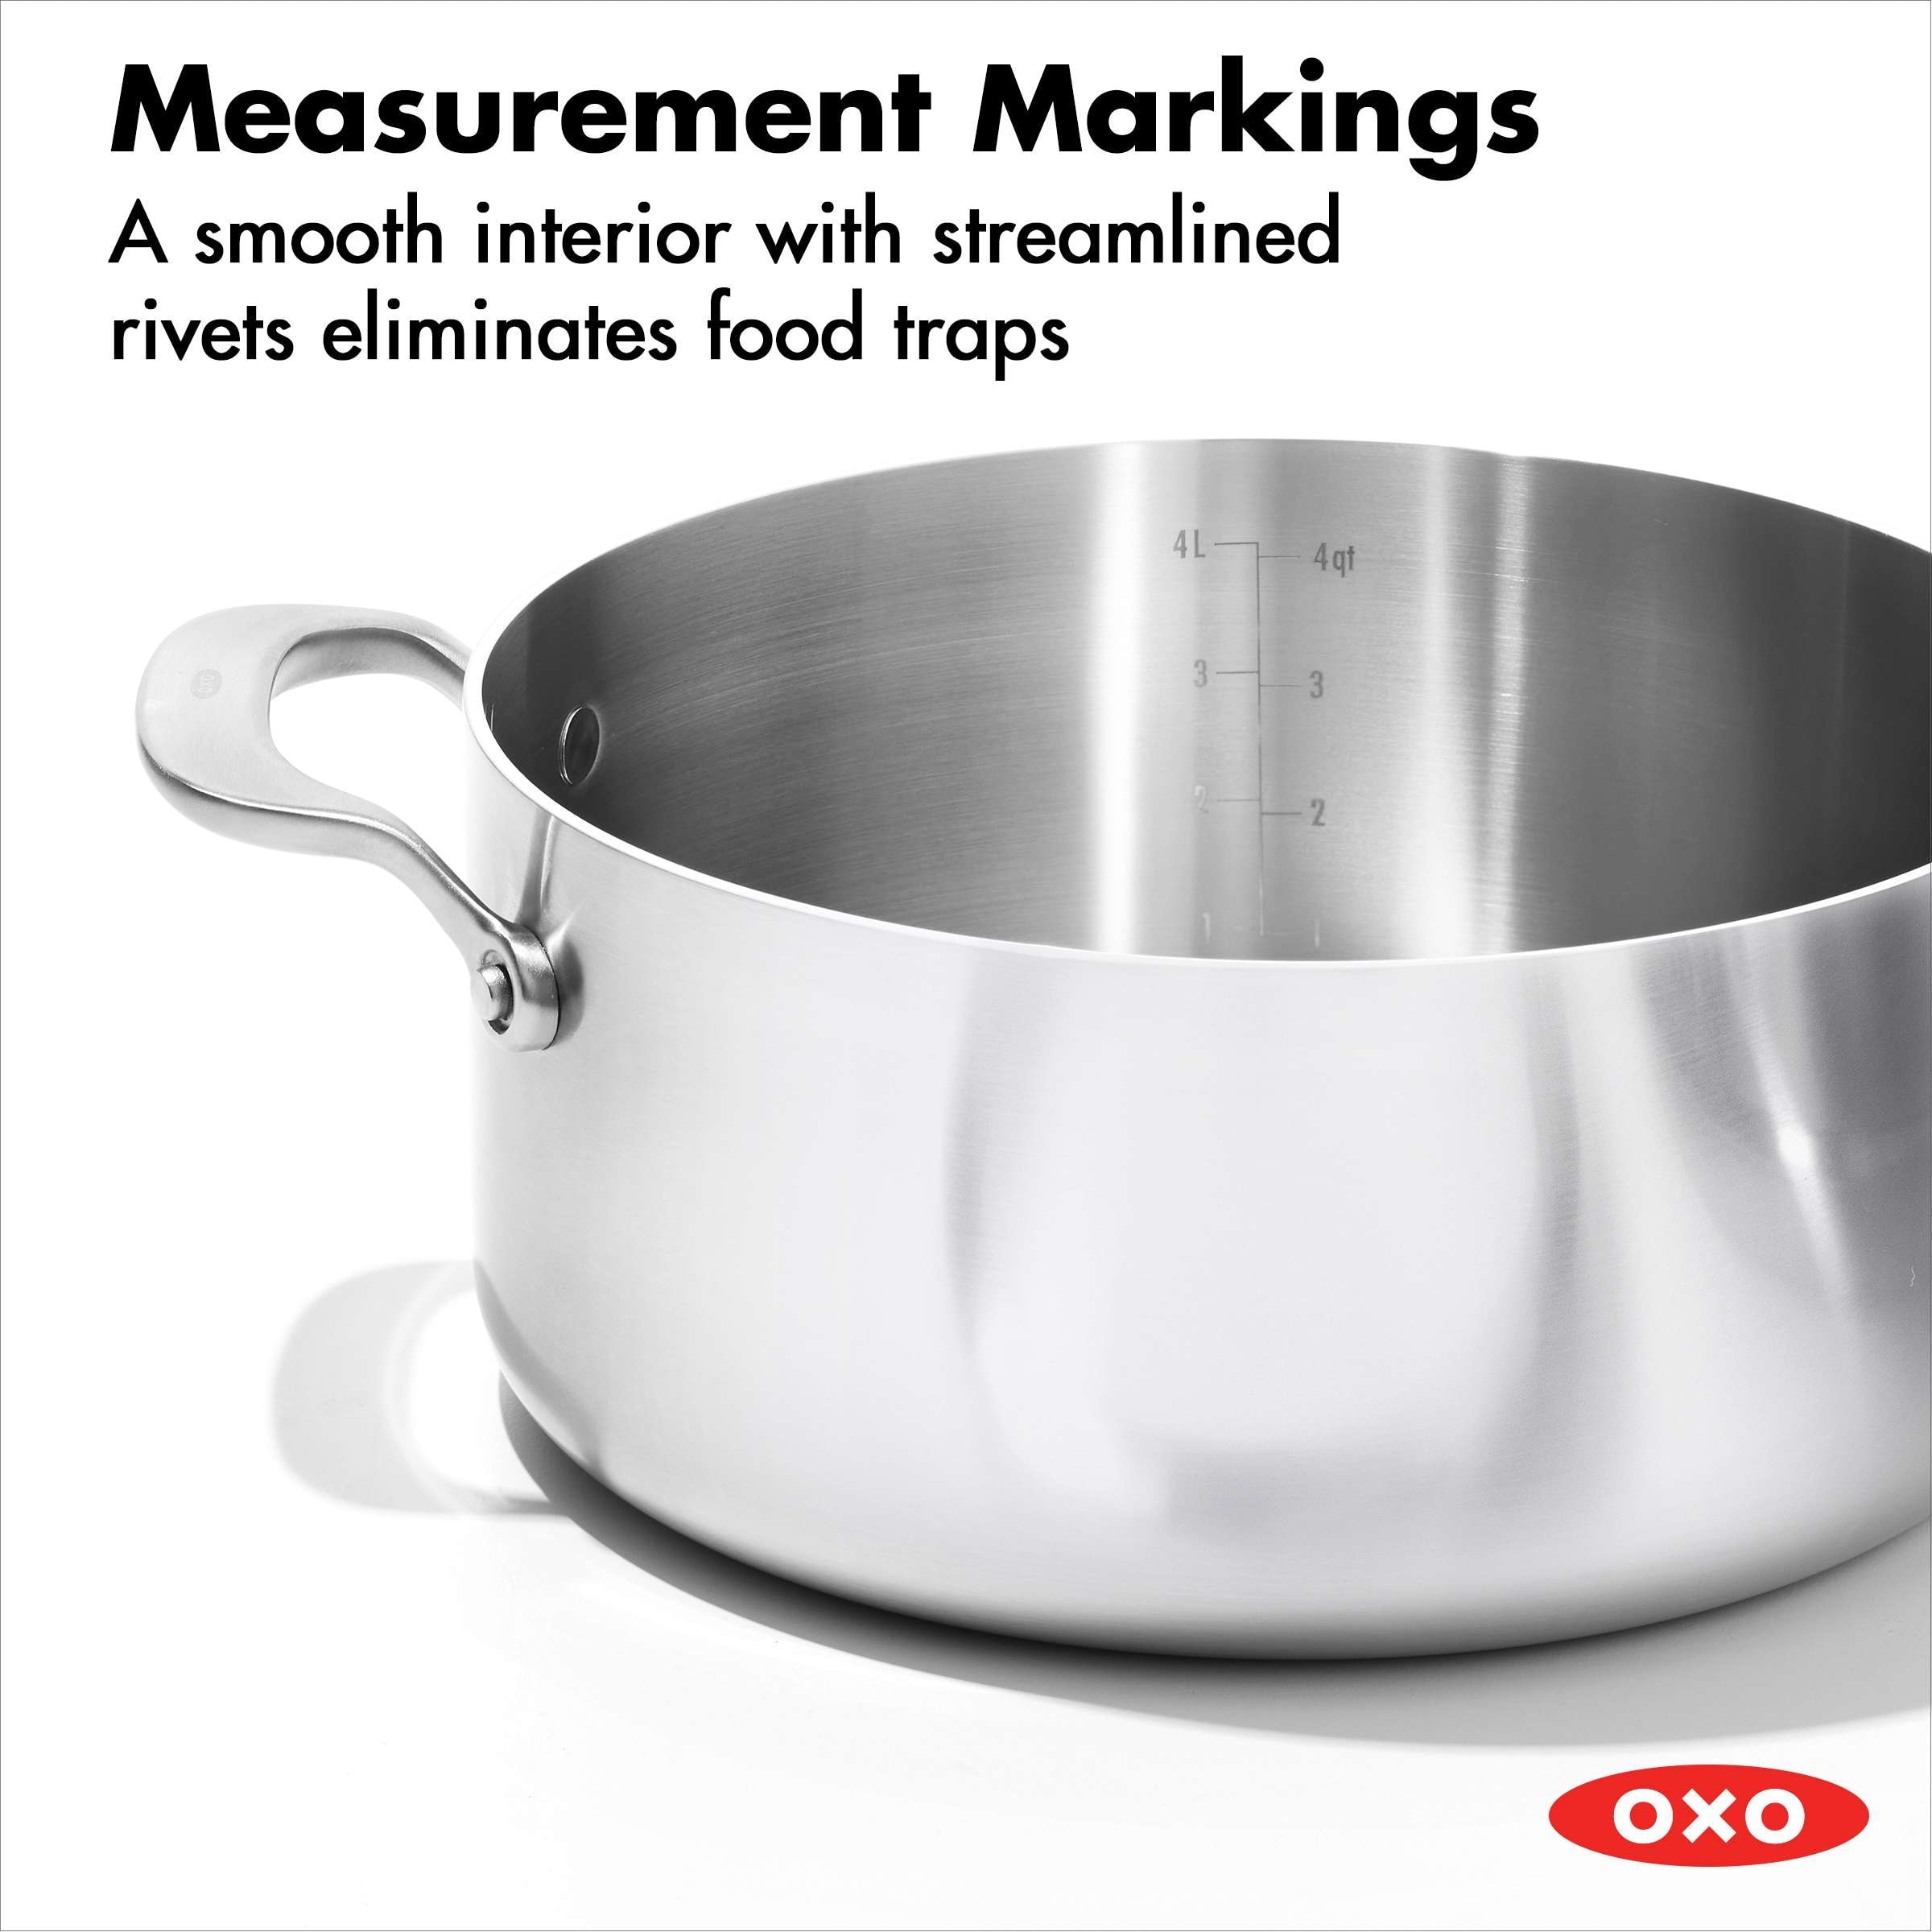 OXO Mira 3-Ply Stainless Steel Cookware Pots and Pans Set, 10